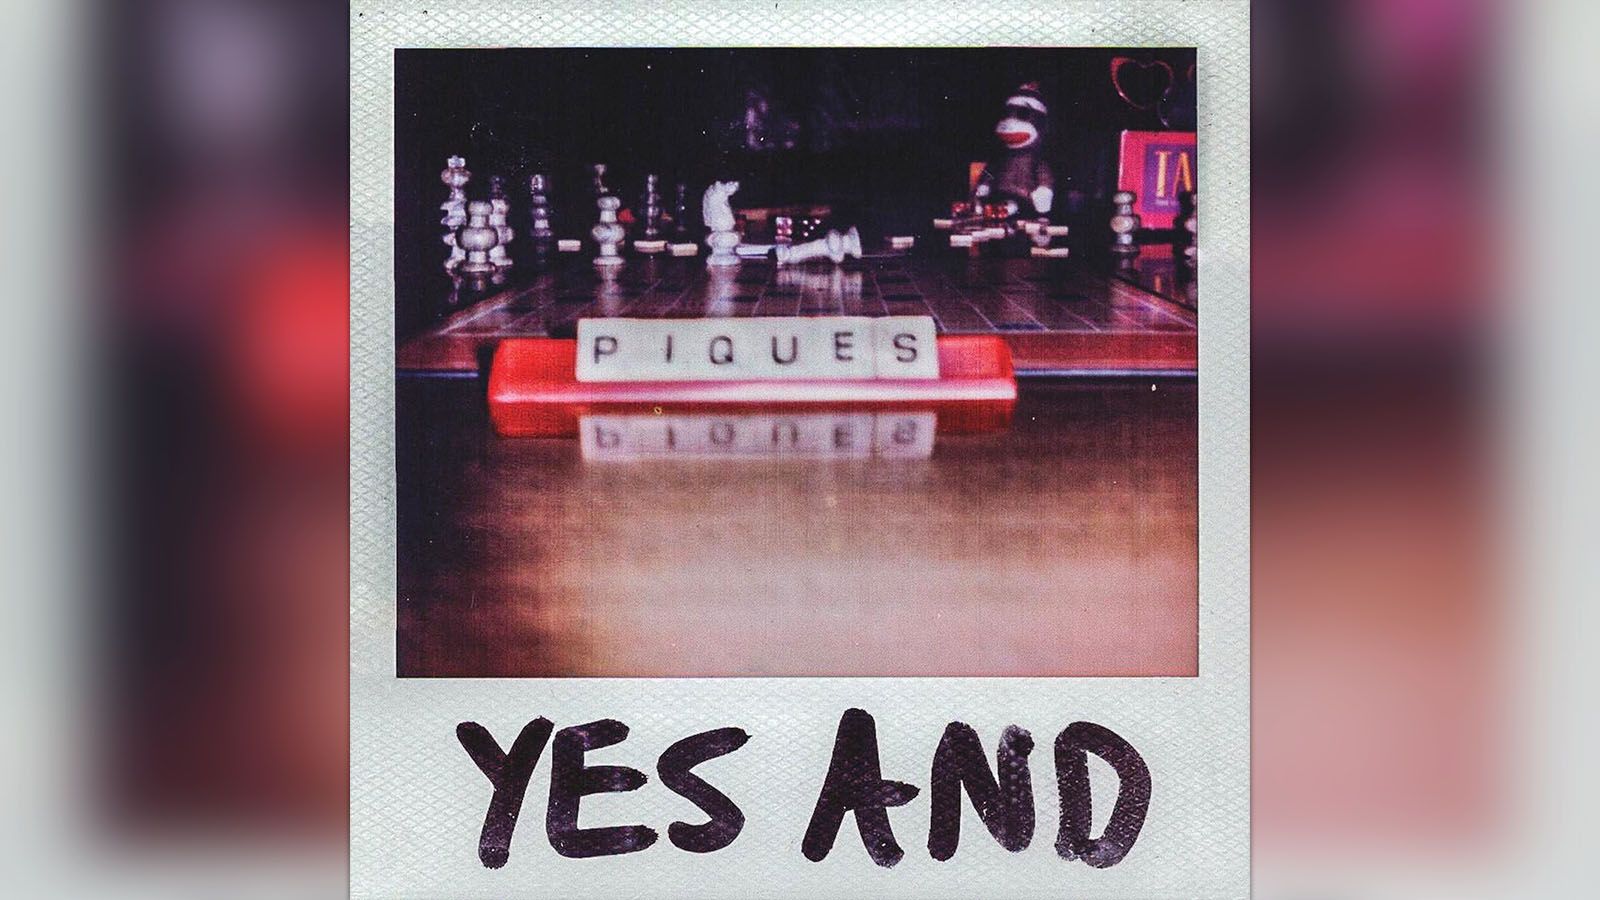 Local band Piques recently released "Yes And."